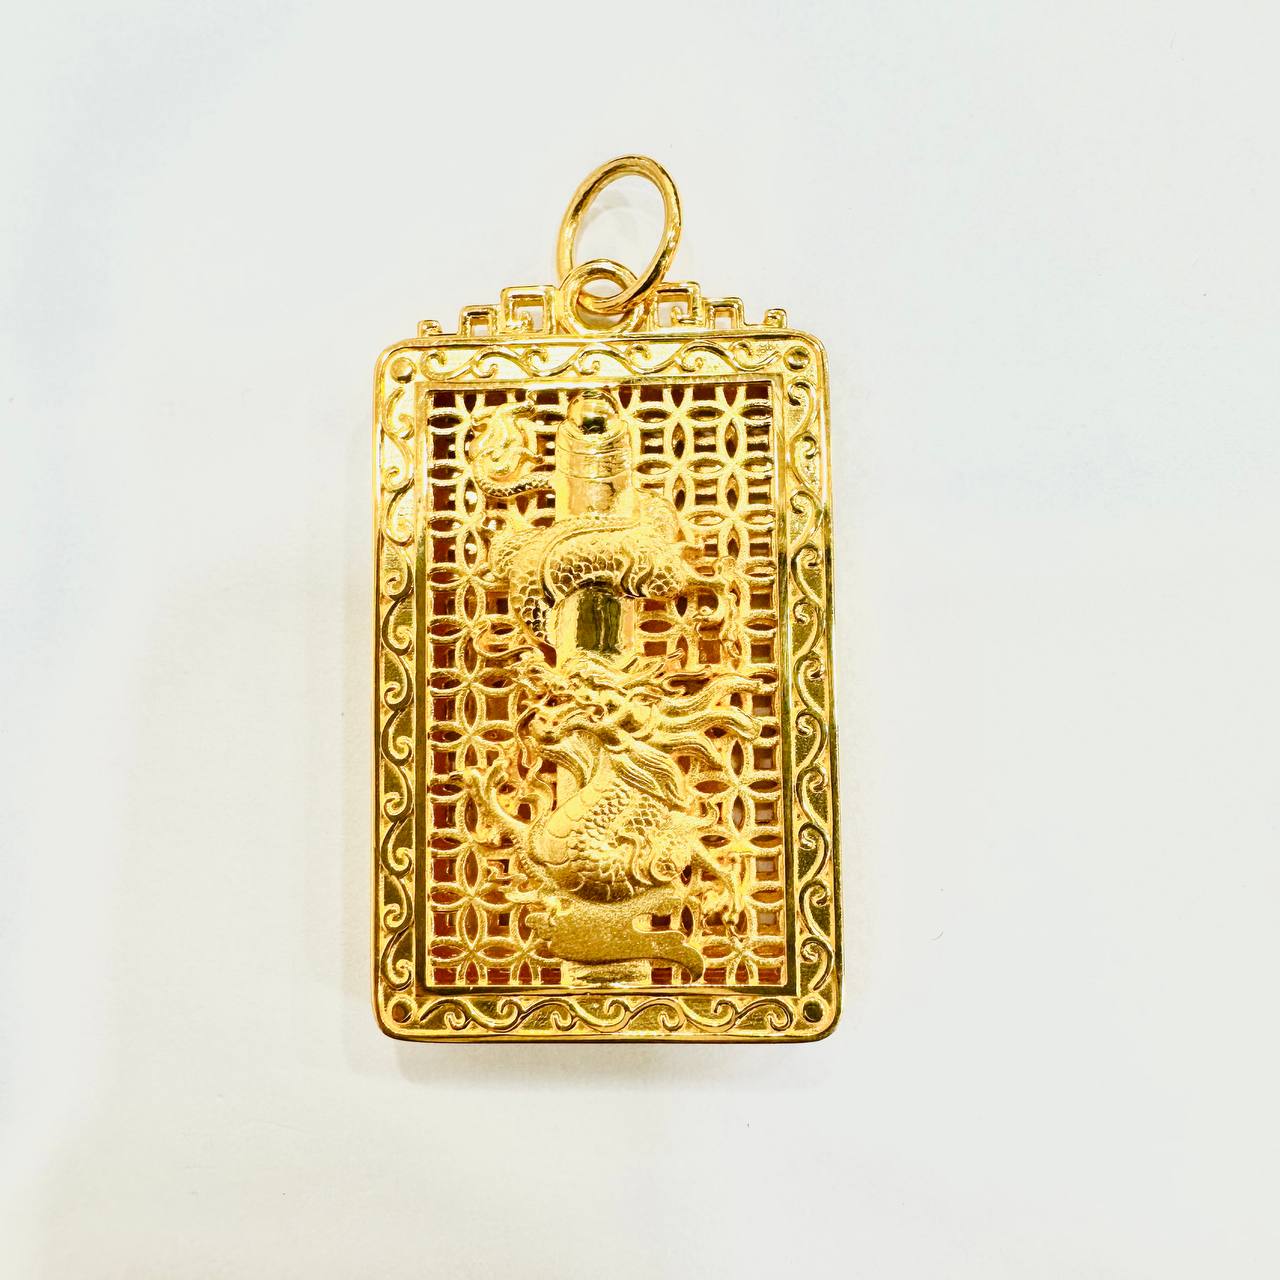 22k / 916 Gold Dragon Pendant Smooth Finish-Charms & Pendants-Best Gold Shop